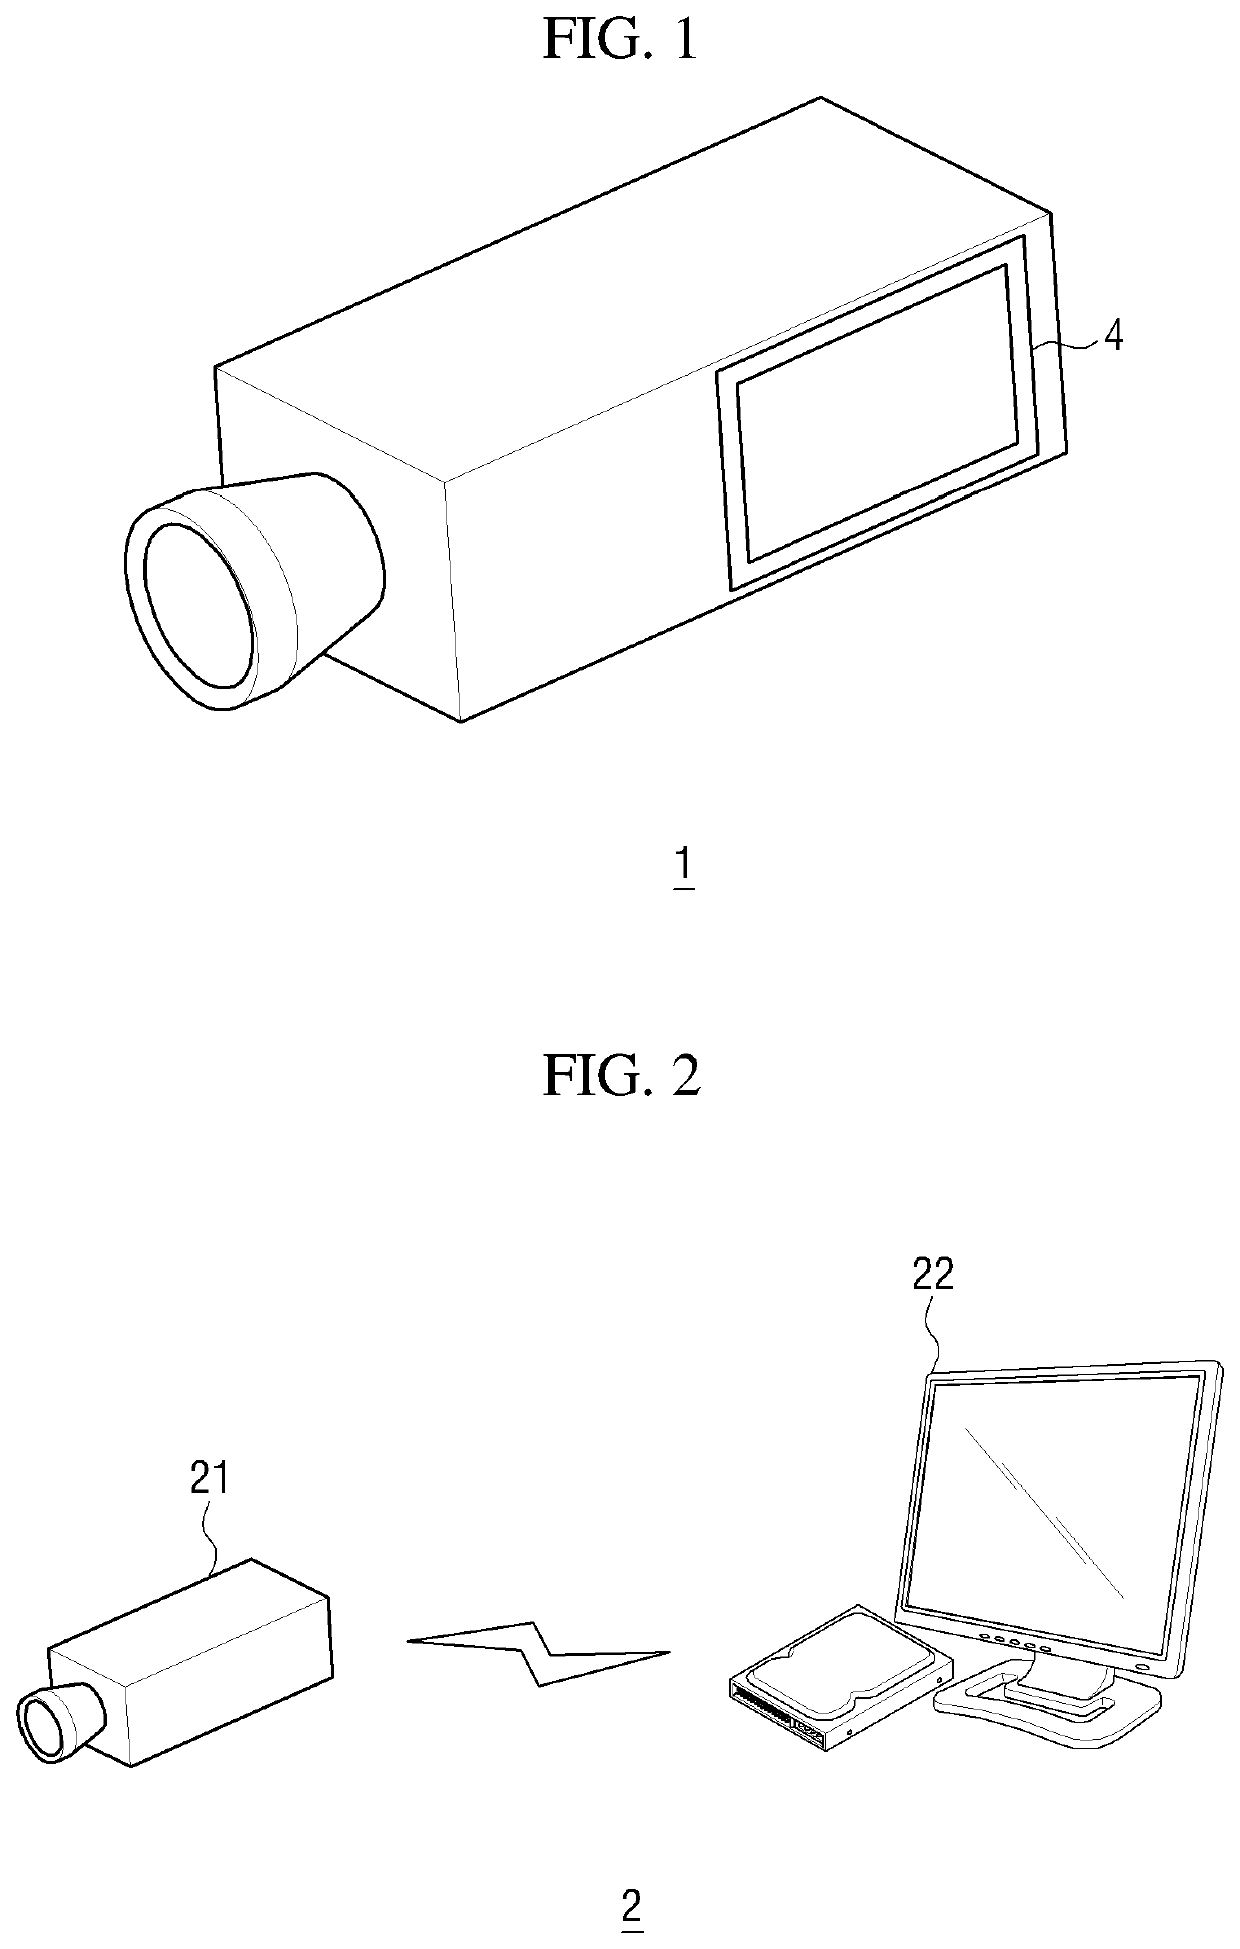 Image capturing apparatus with variable event detecting condition